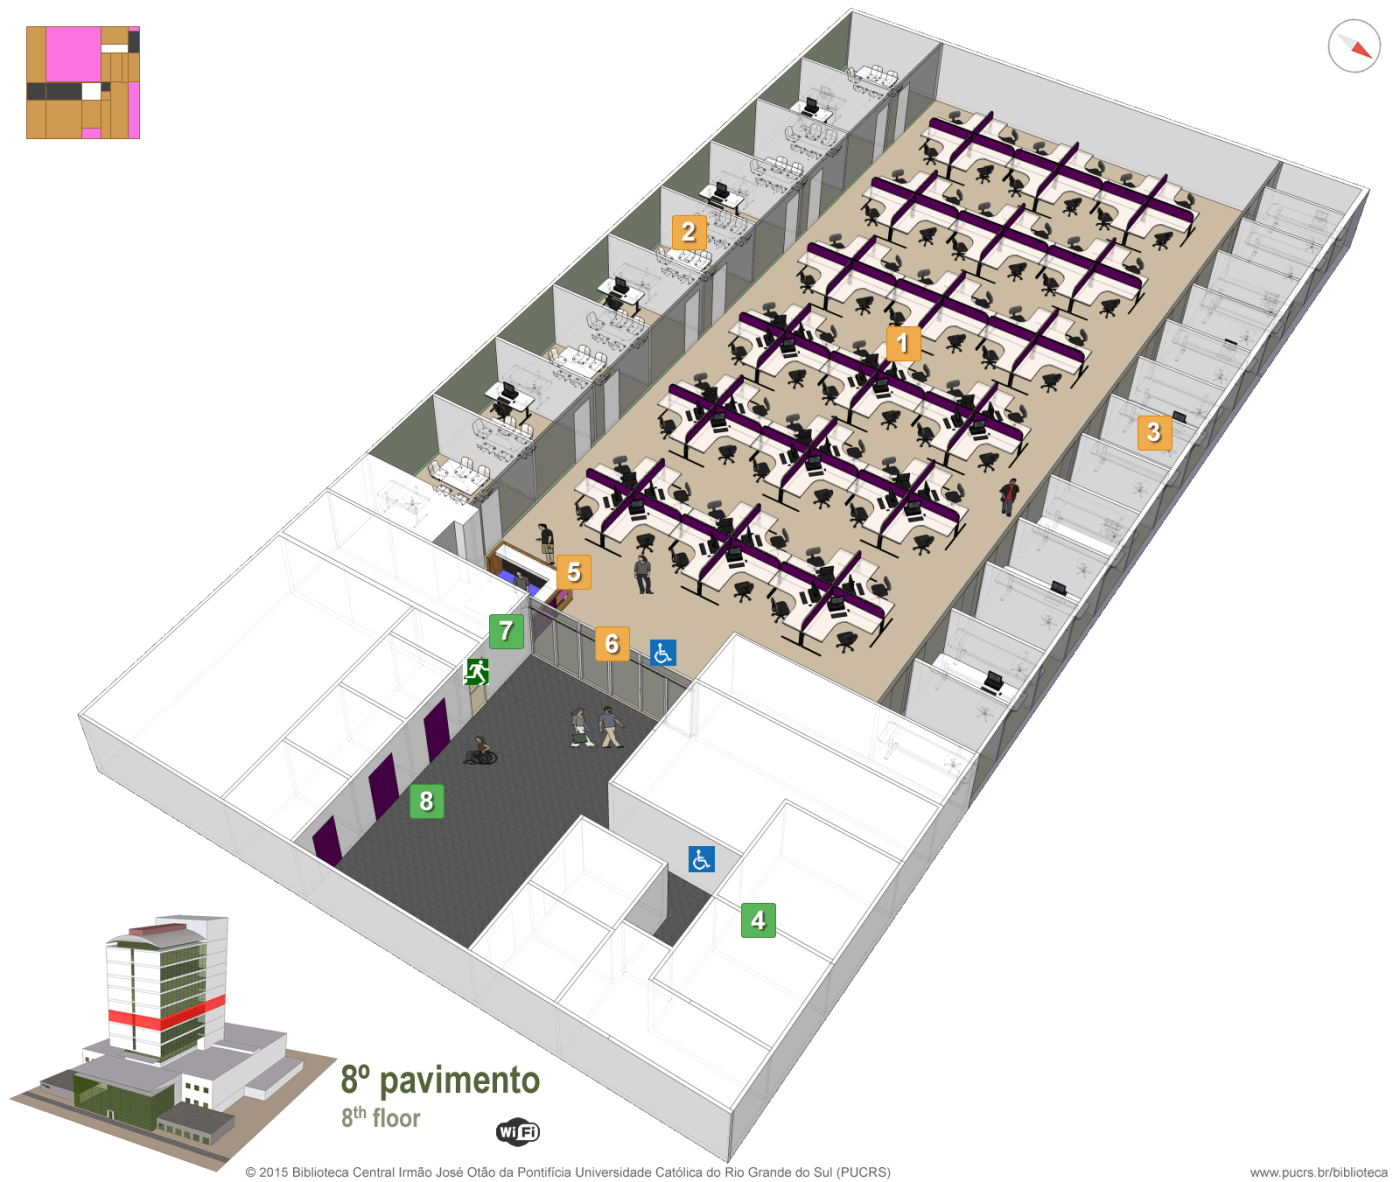 3D Rendering of the 8th floor of the Main Library of Pontifical Catholic University of Rio Grande do Sul - PUCRS